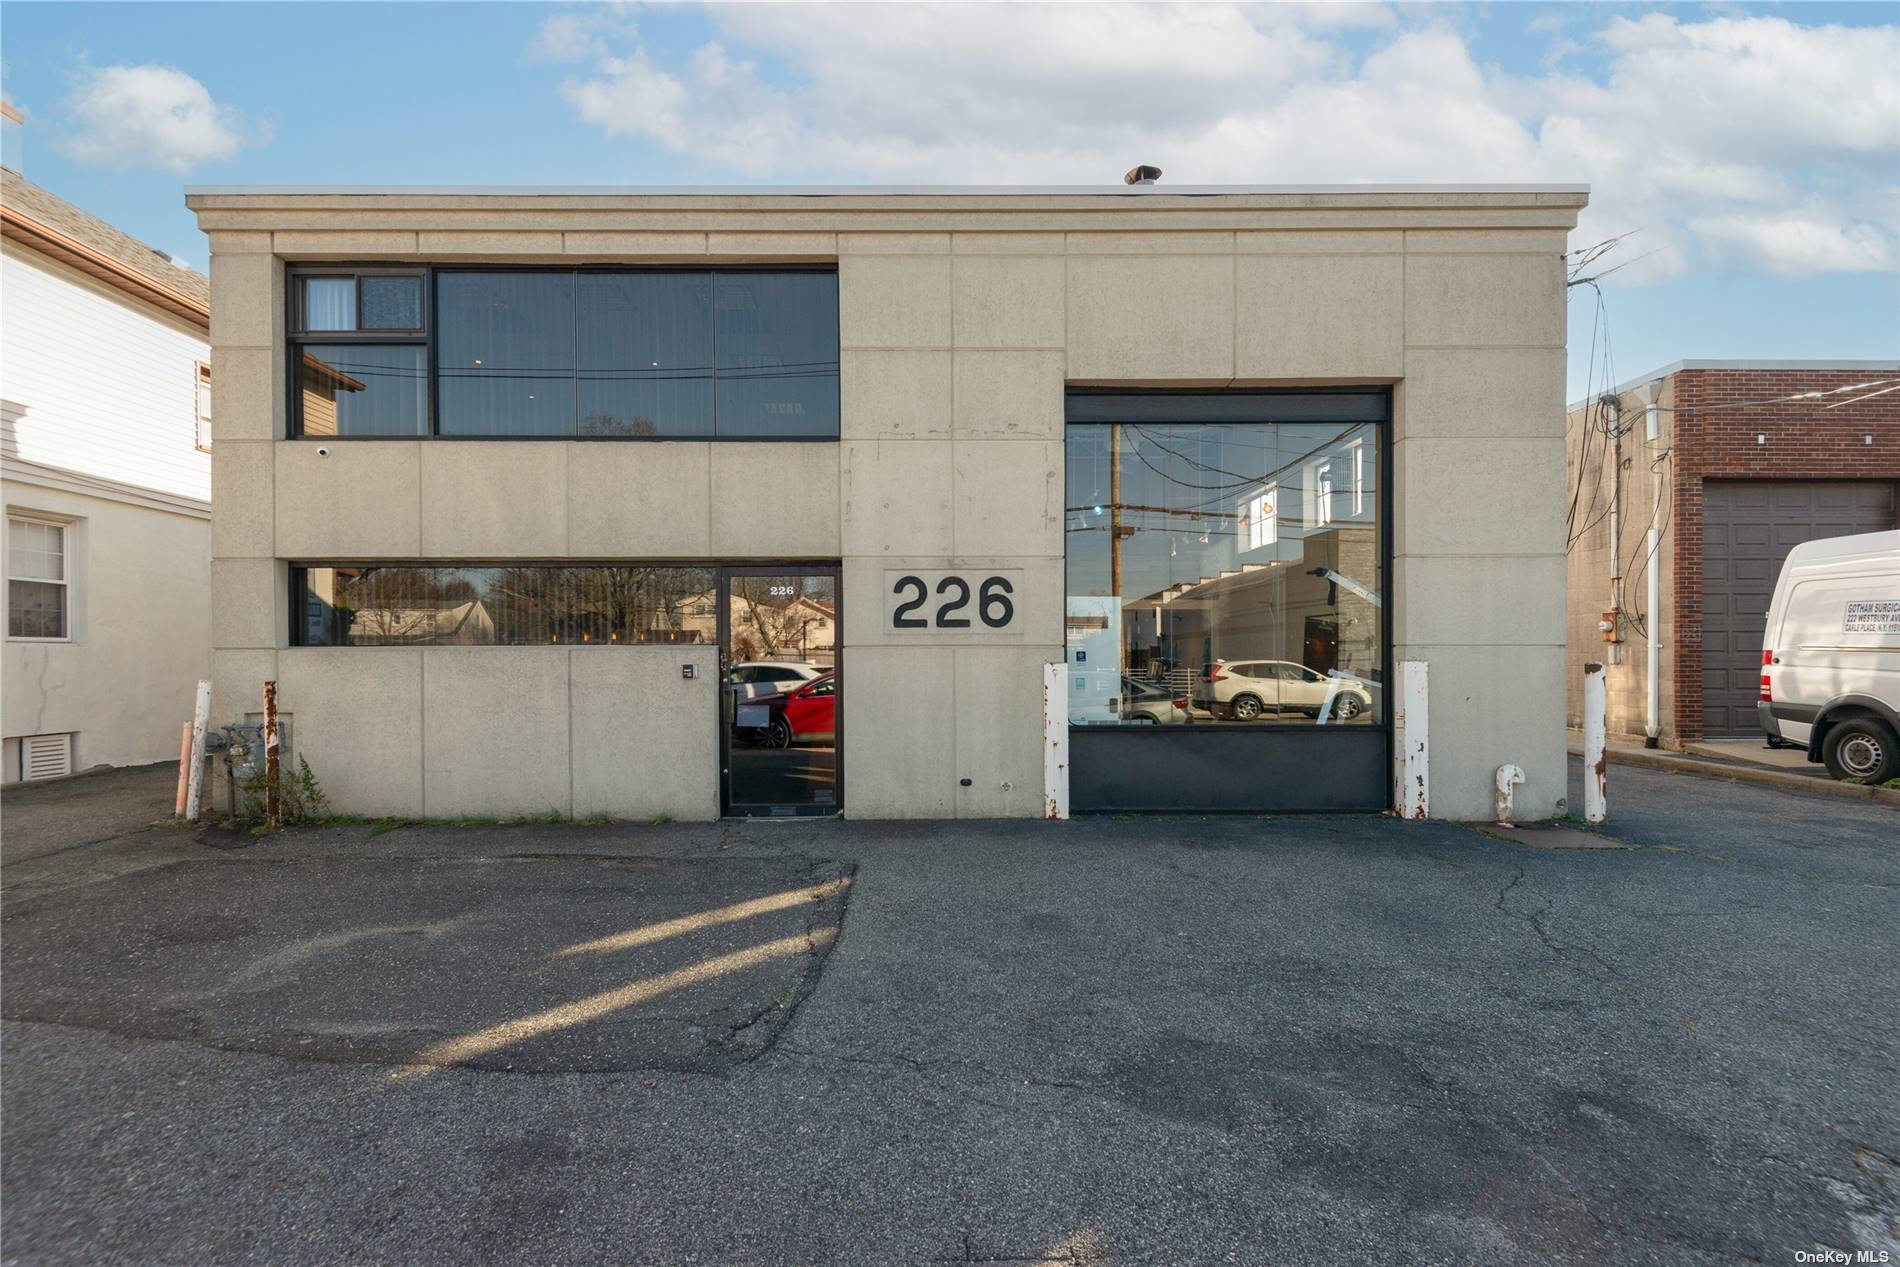 Prime Opportunity to Own this Versatile two story Commercial building.